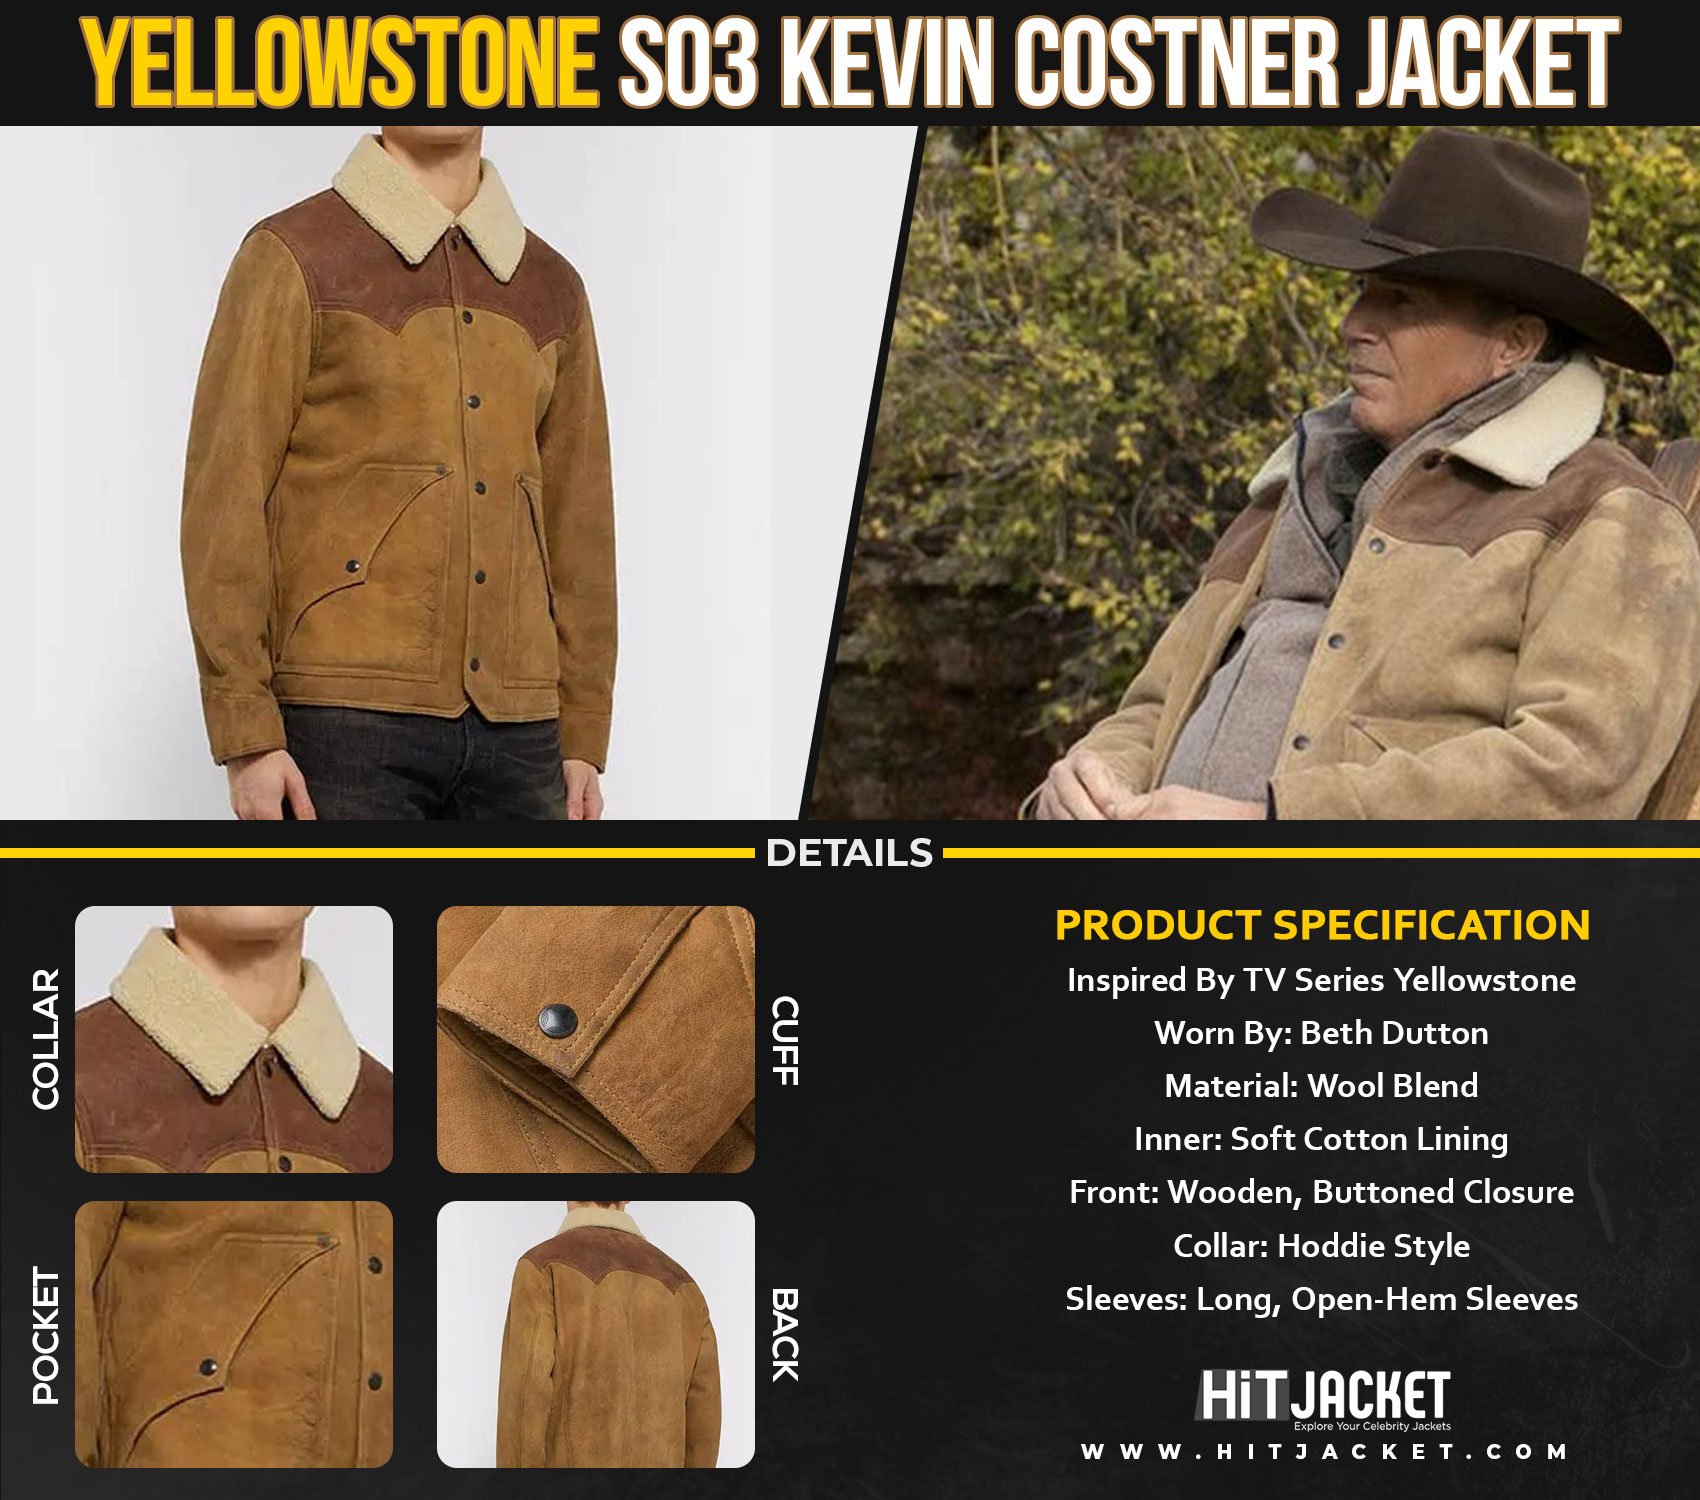 Yellowstone S03 Kevin Costner Jacket